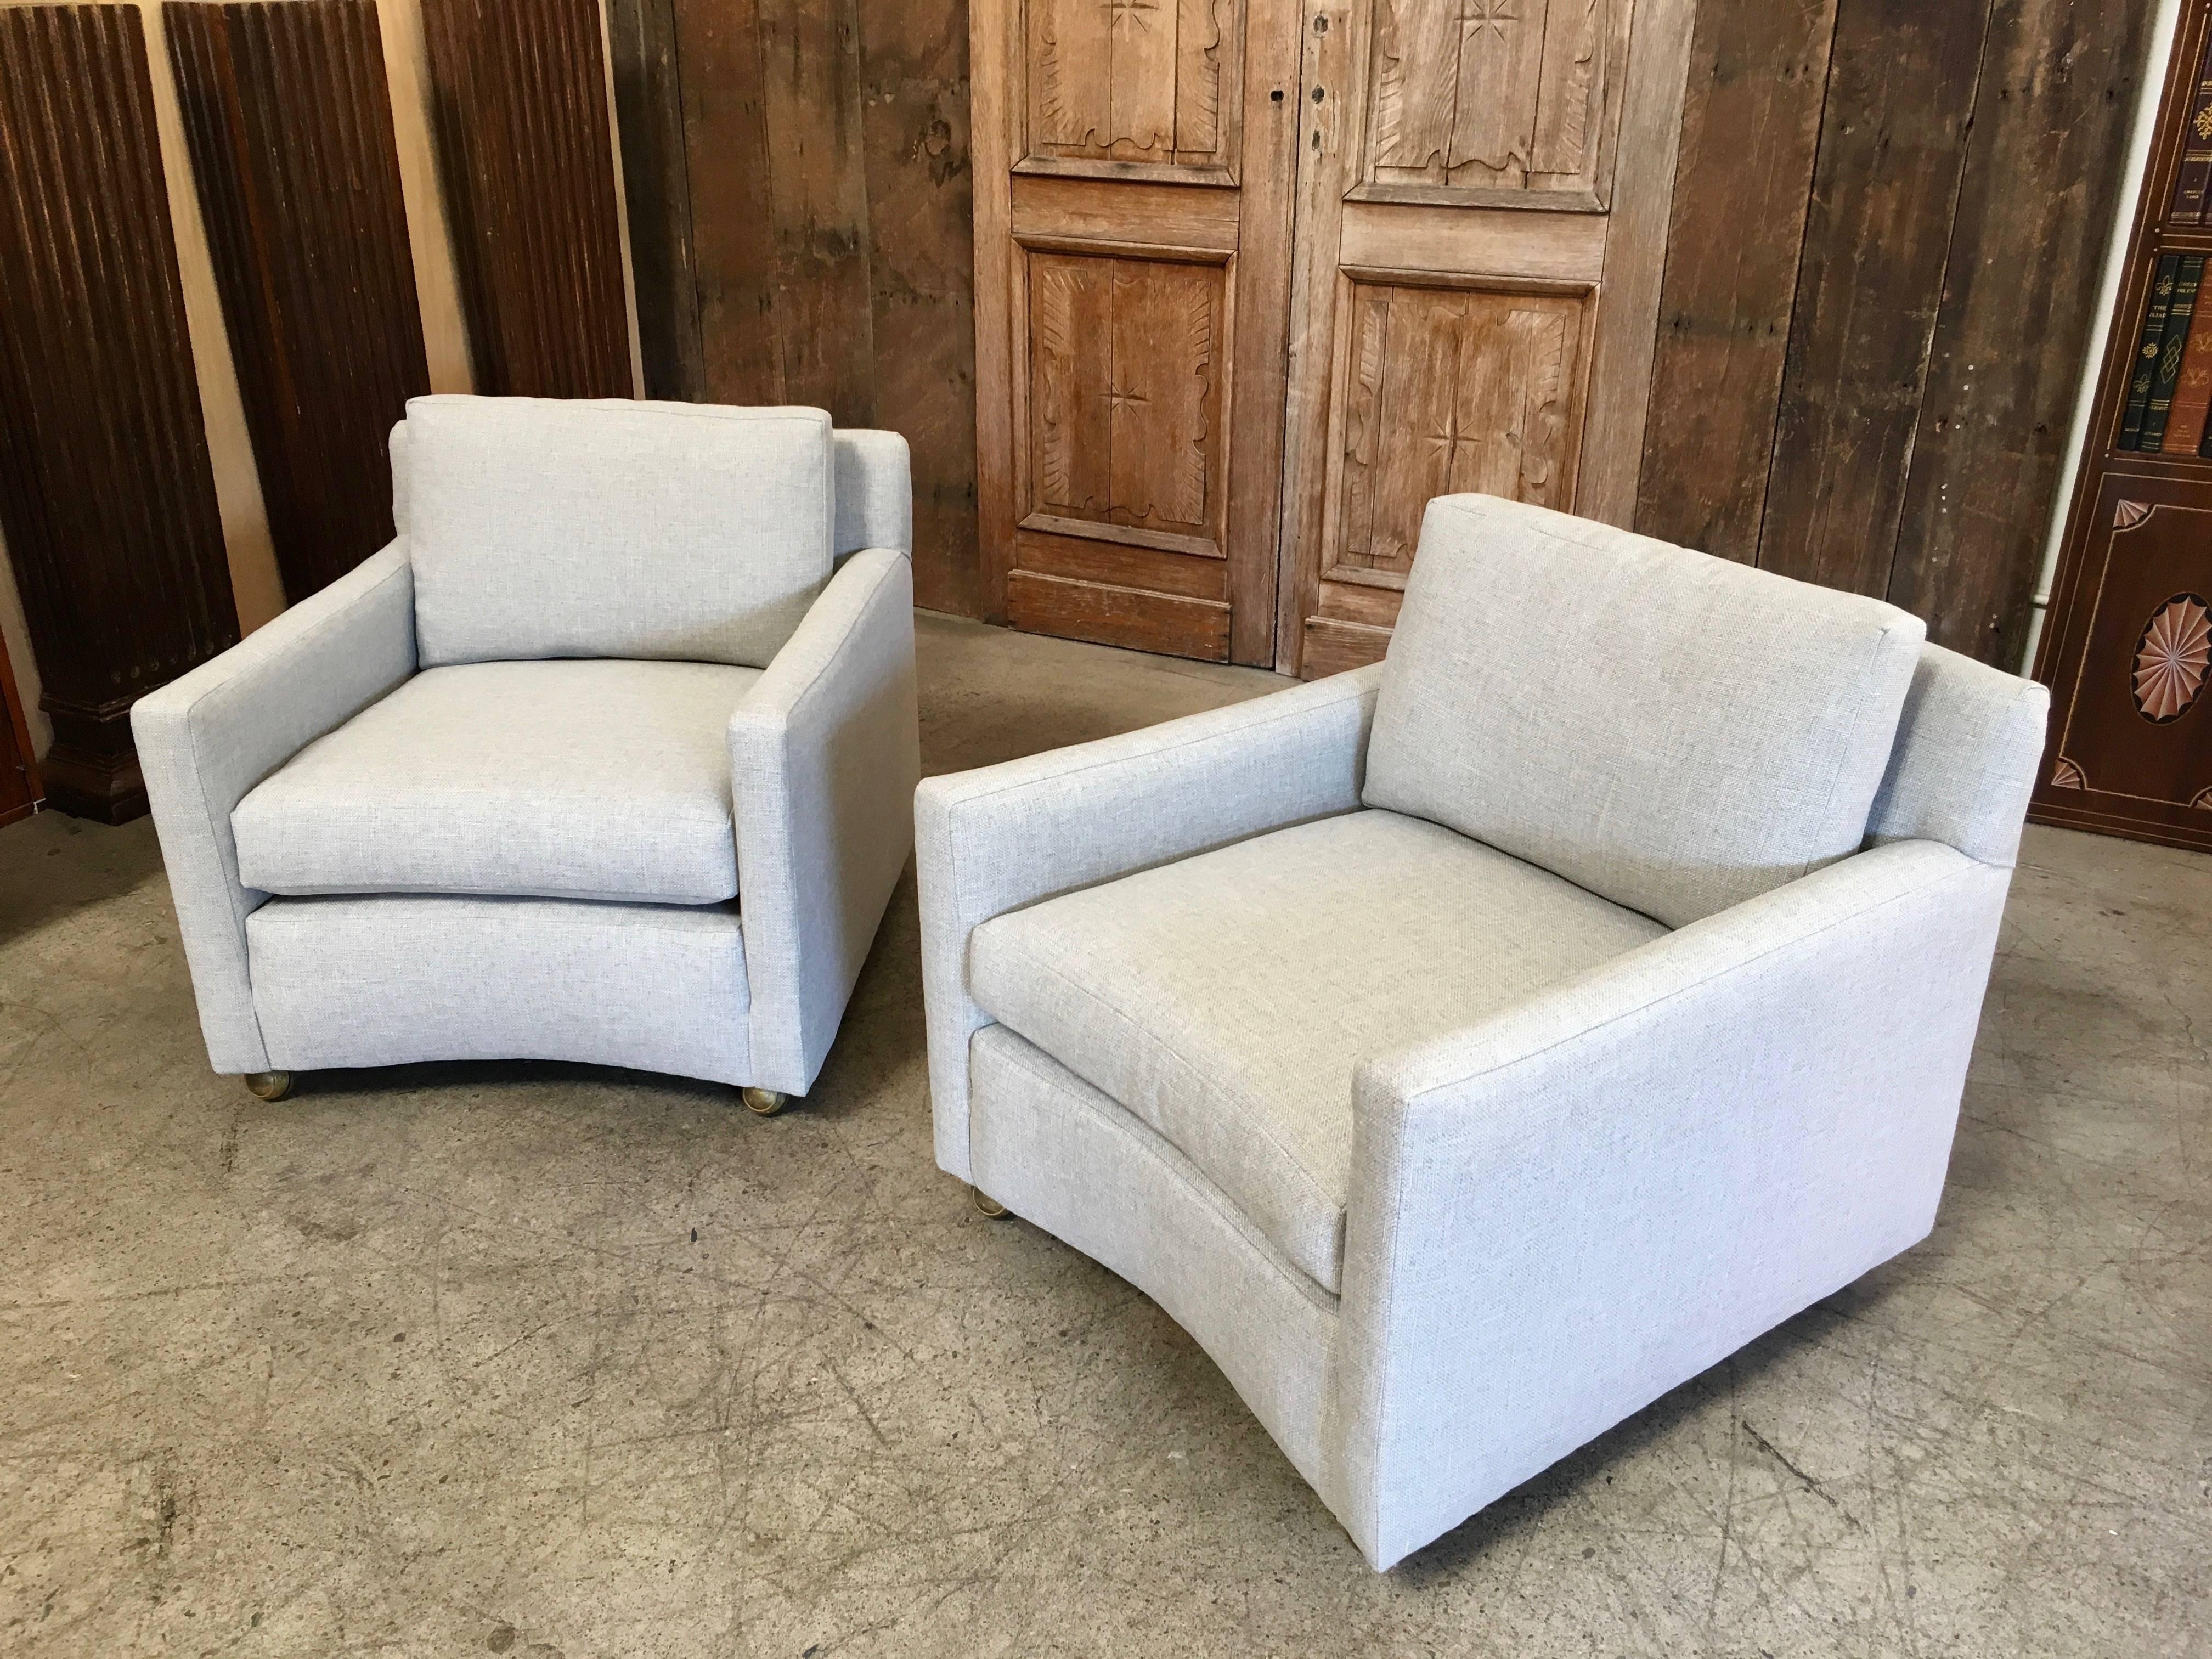 Very angular with curved front and back club chairs. Down filled cushions for the best comfort and the practicality of casters to keep these mobile with that floating look.